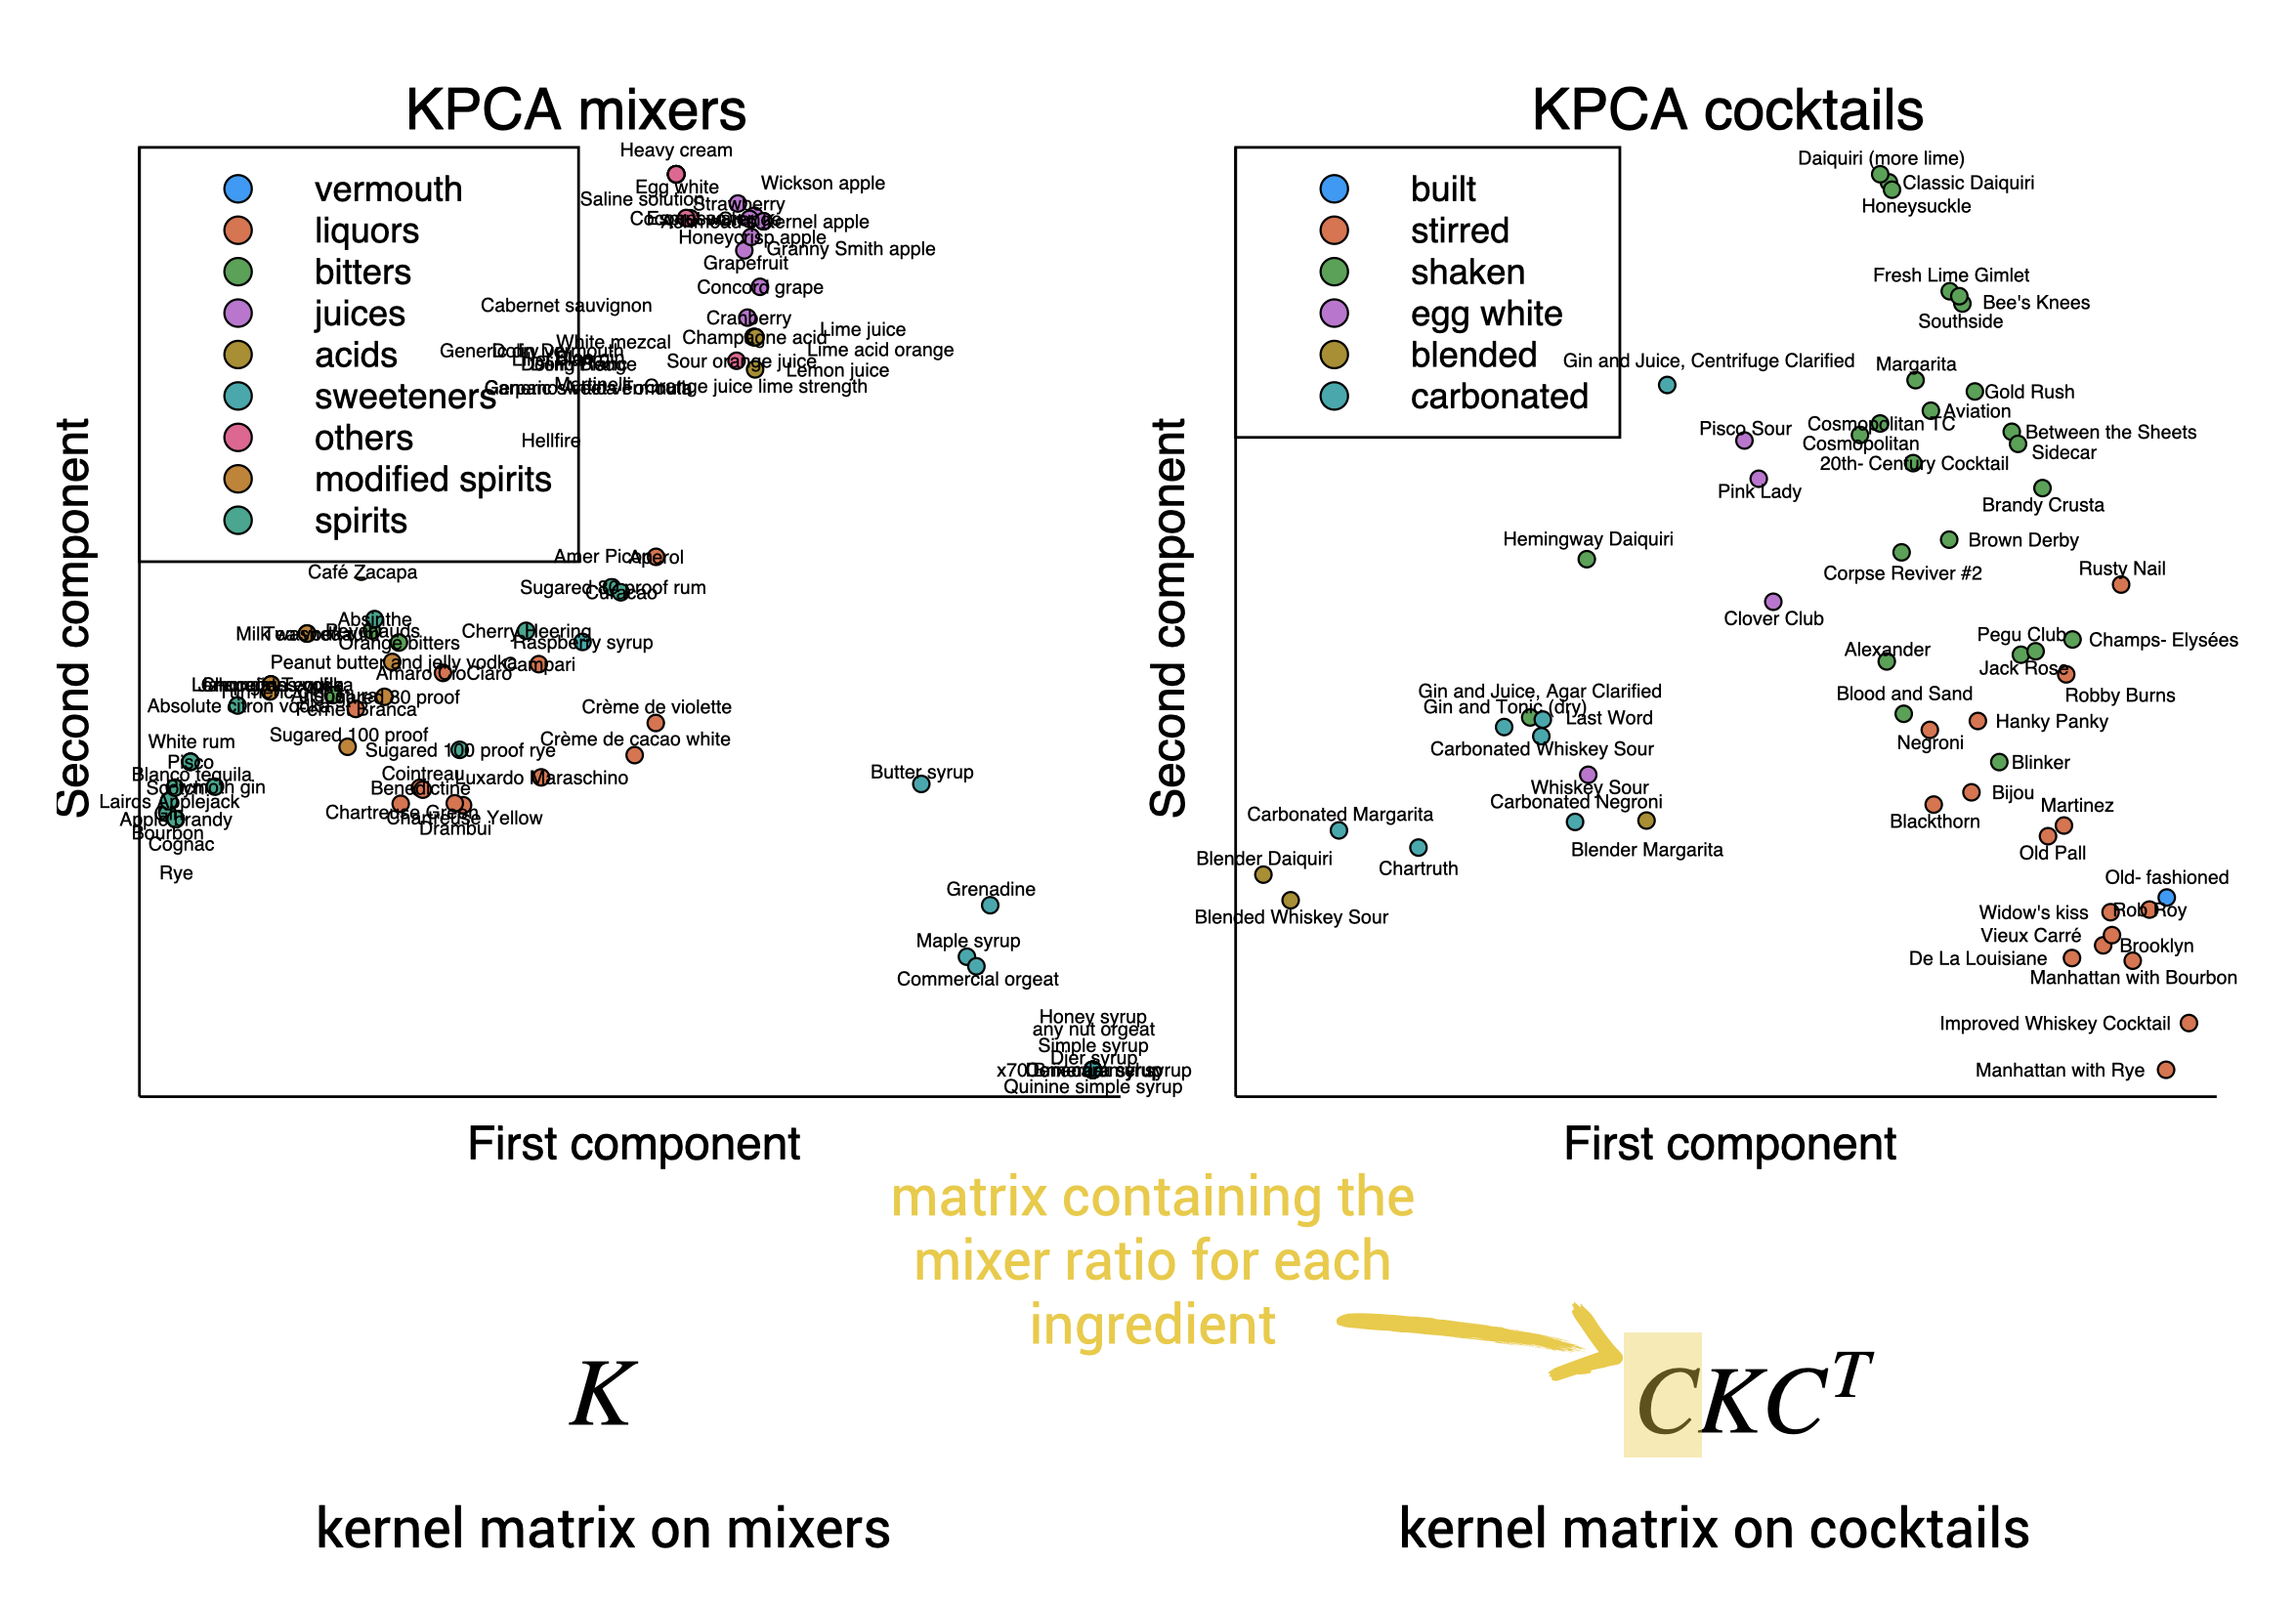 Kernel PCA of the mixers and the cocktails.